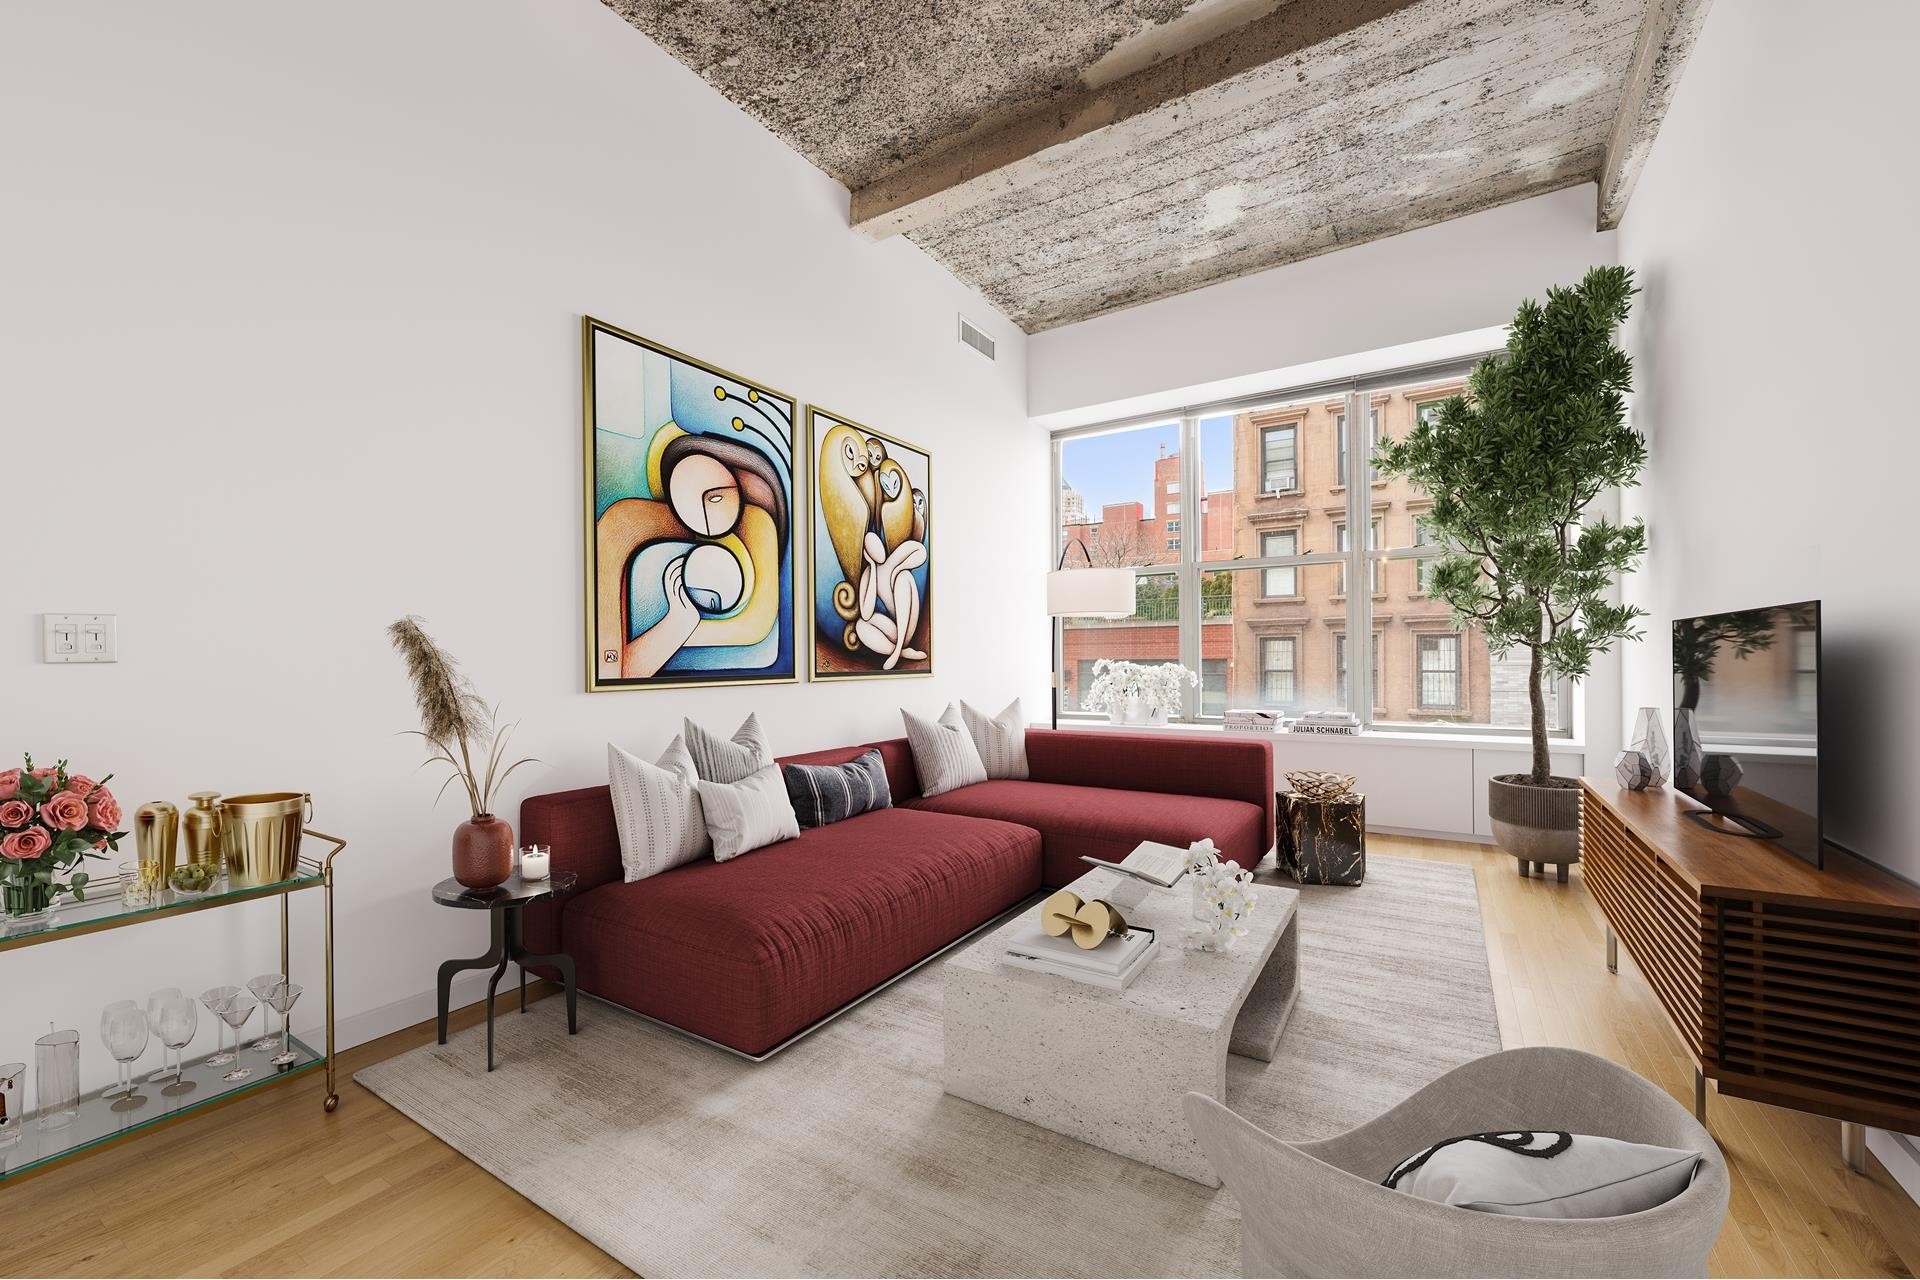 Co-op Properties for Sale at Loft 55, 419 W 55TH ST, 2B Hell's Kitchen, New York, NY 10019